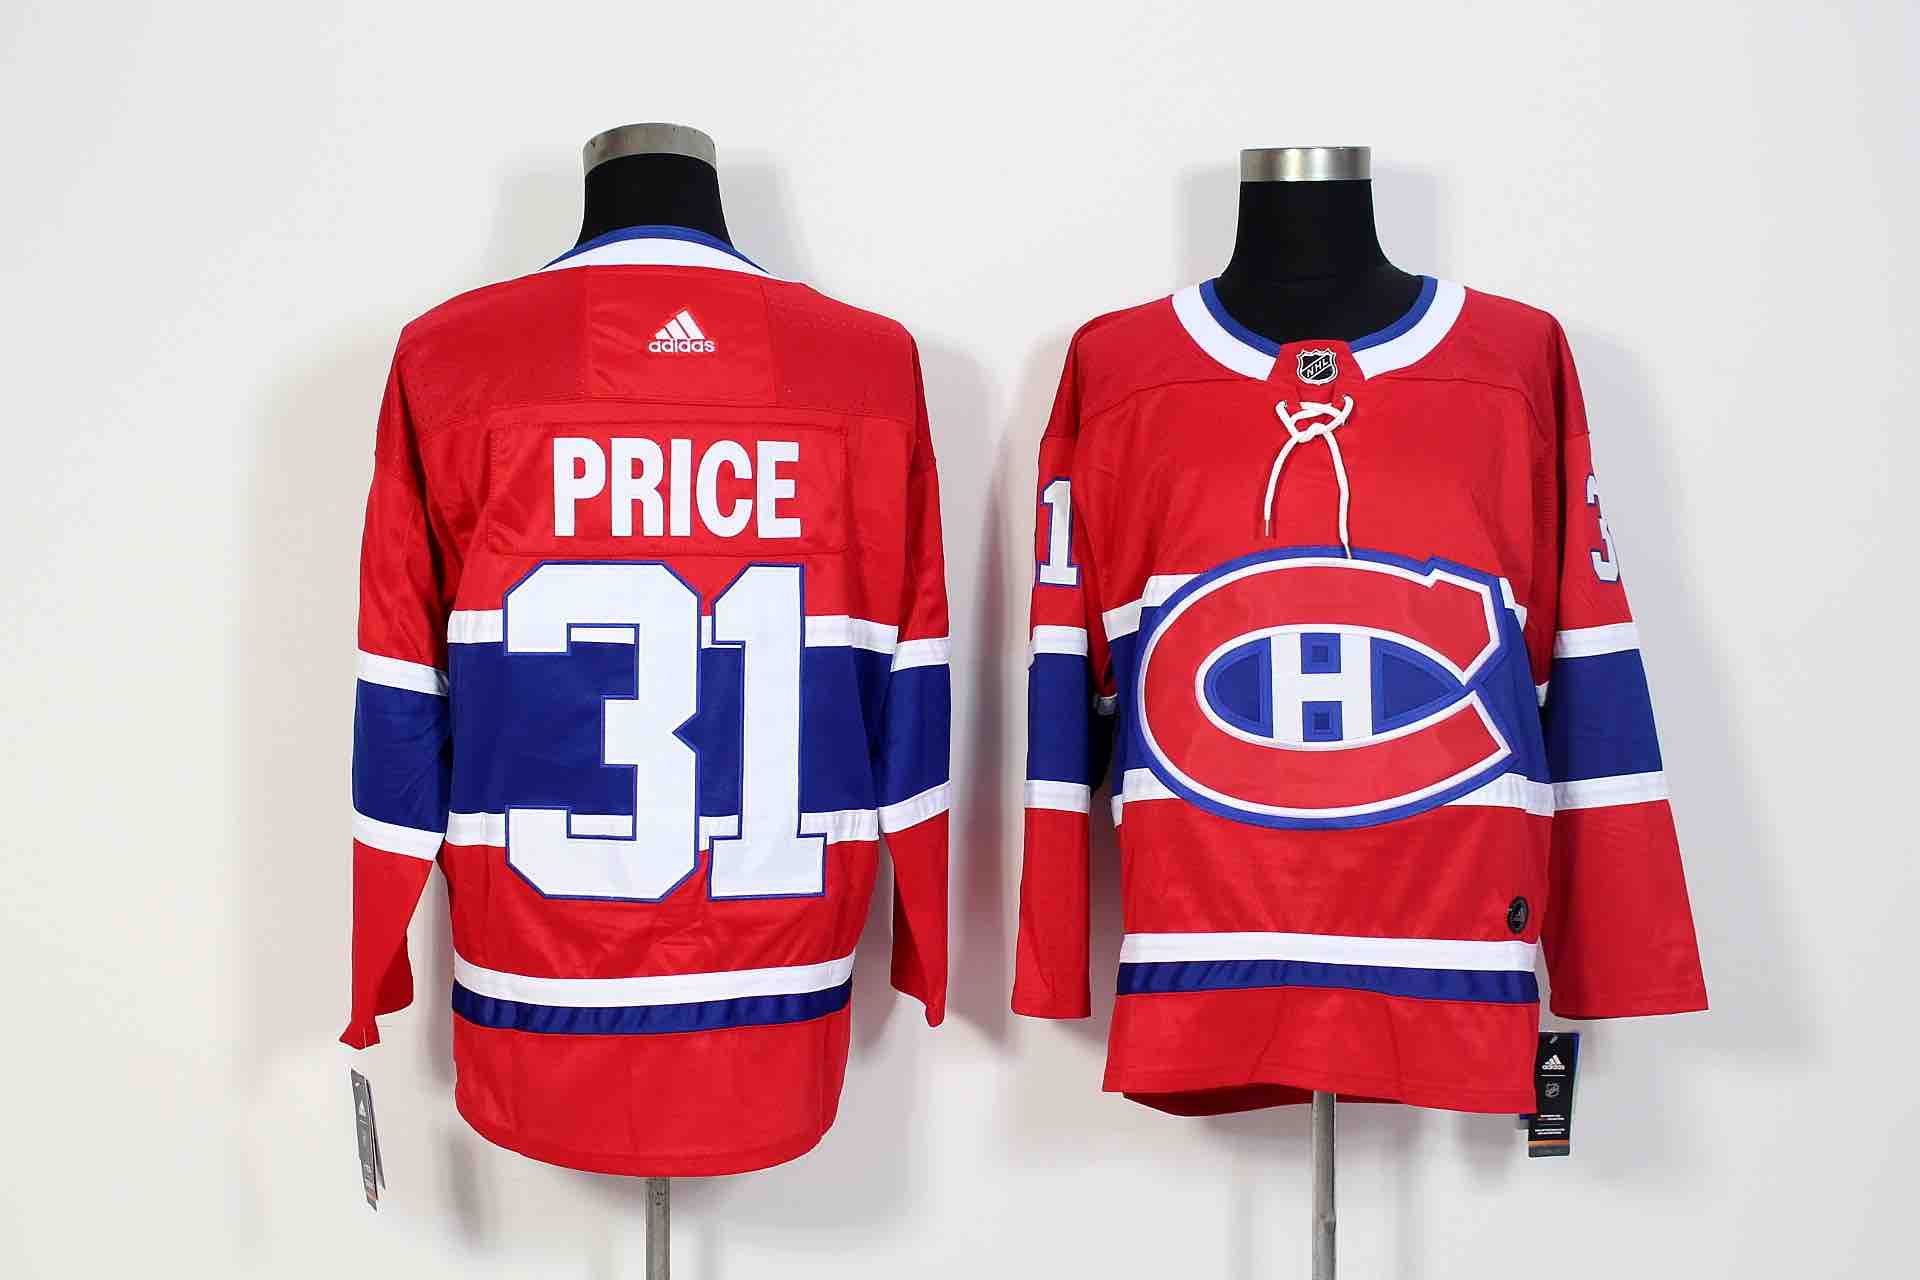 Adidas NHL Montreal Canadiens #31 Price Red Jersey